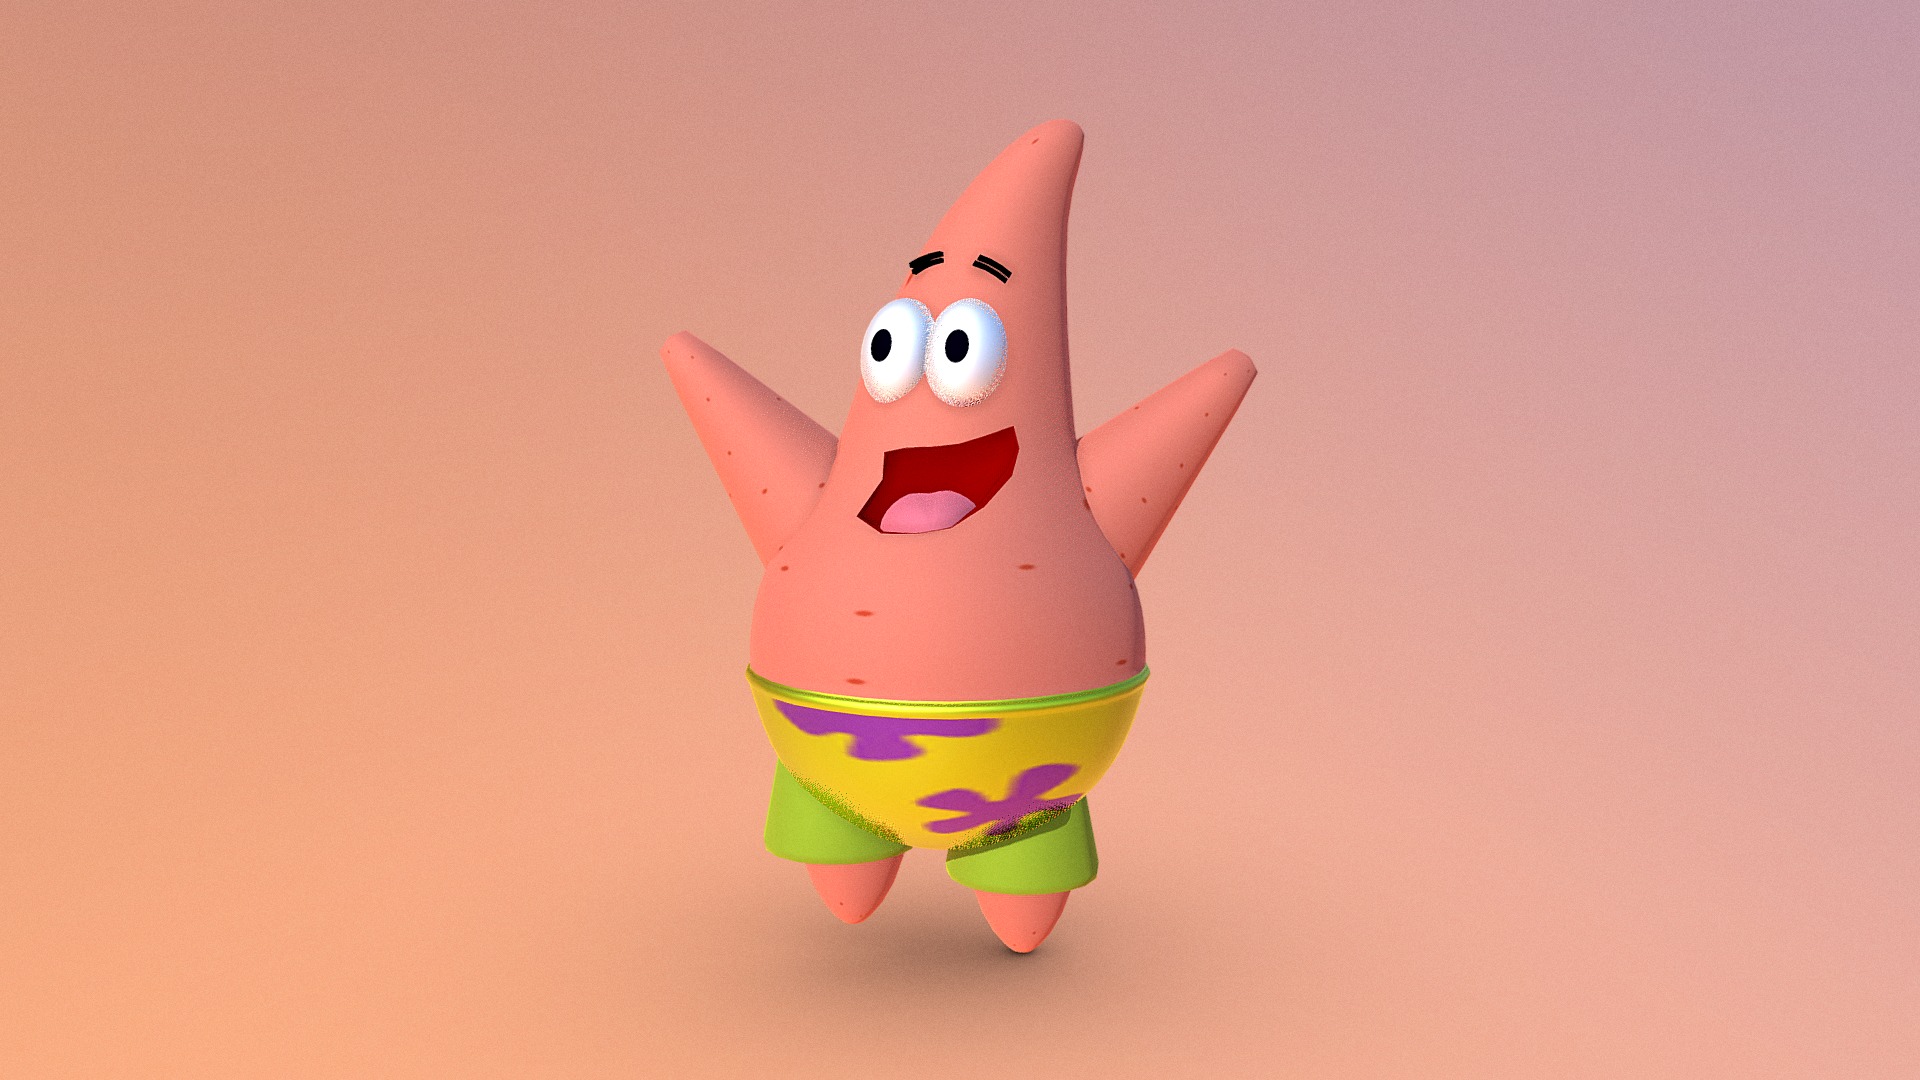 Patrick Star is a fictional character in the American animated television s...